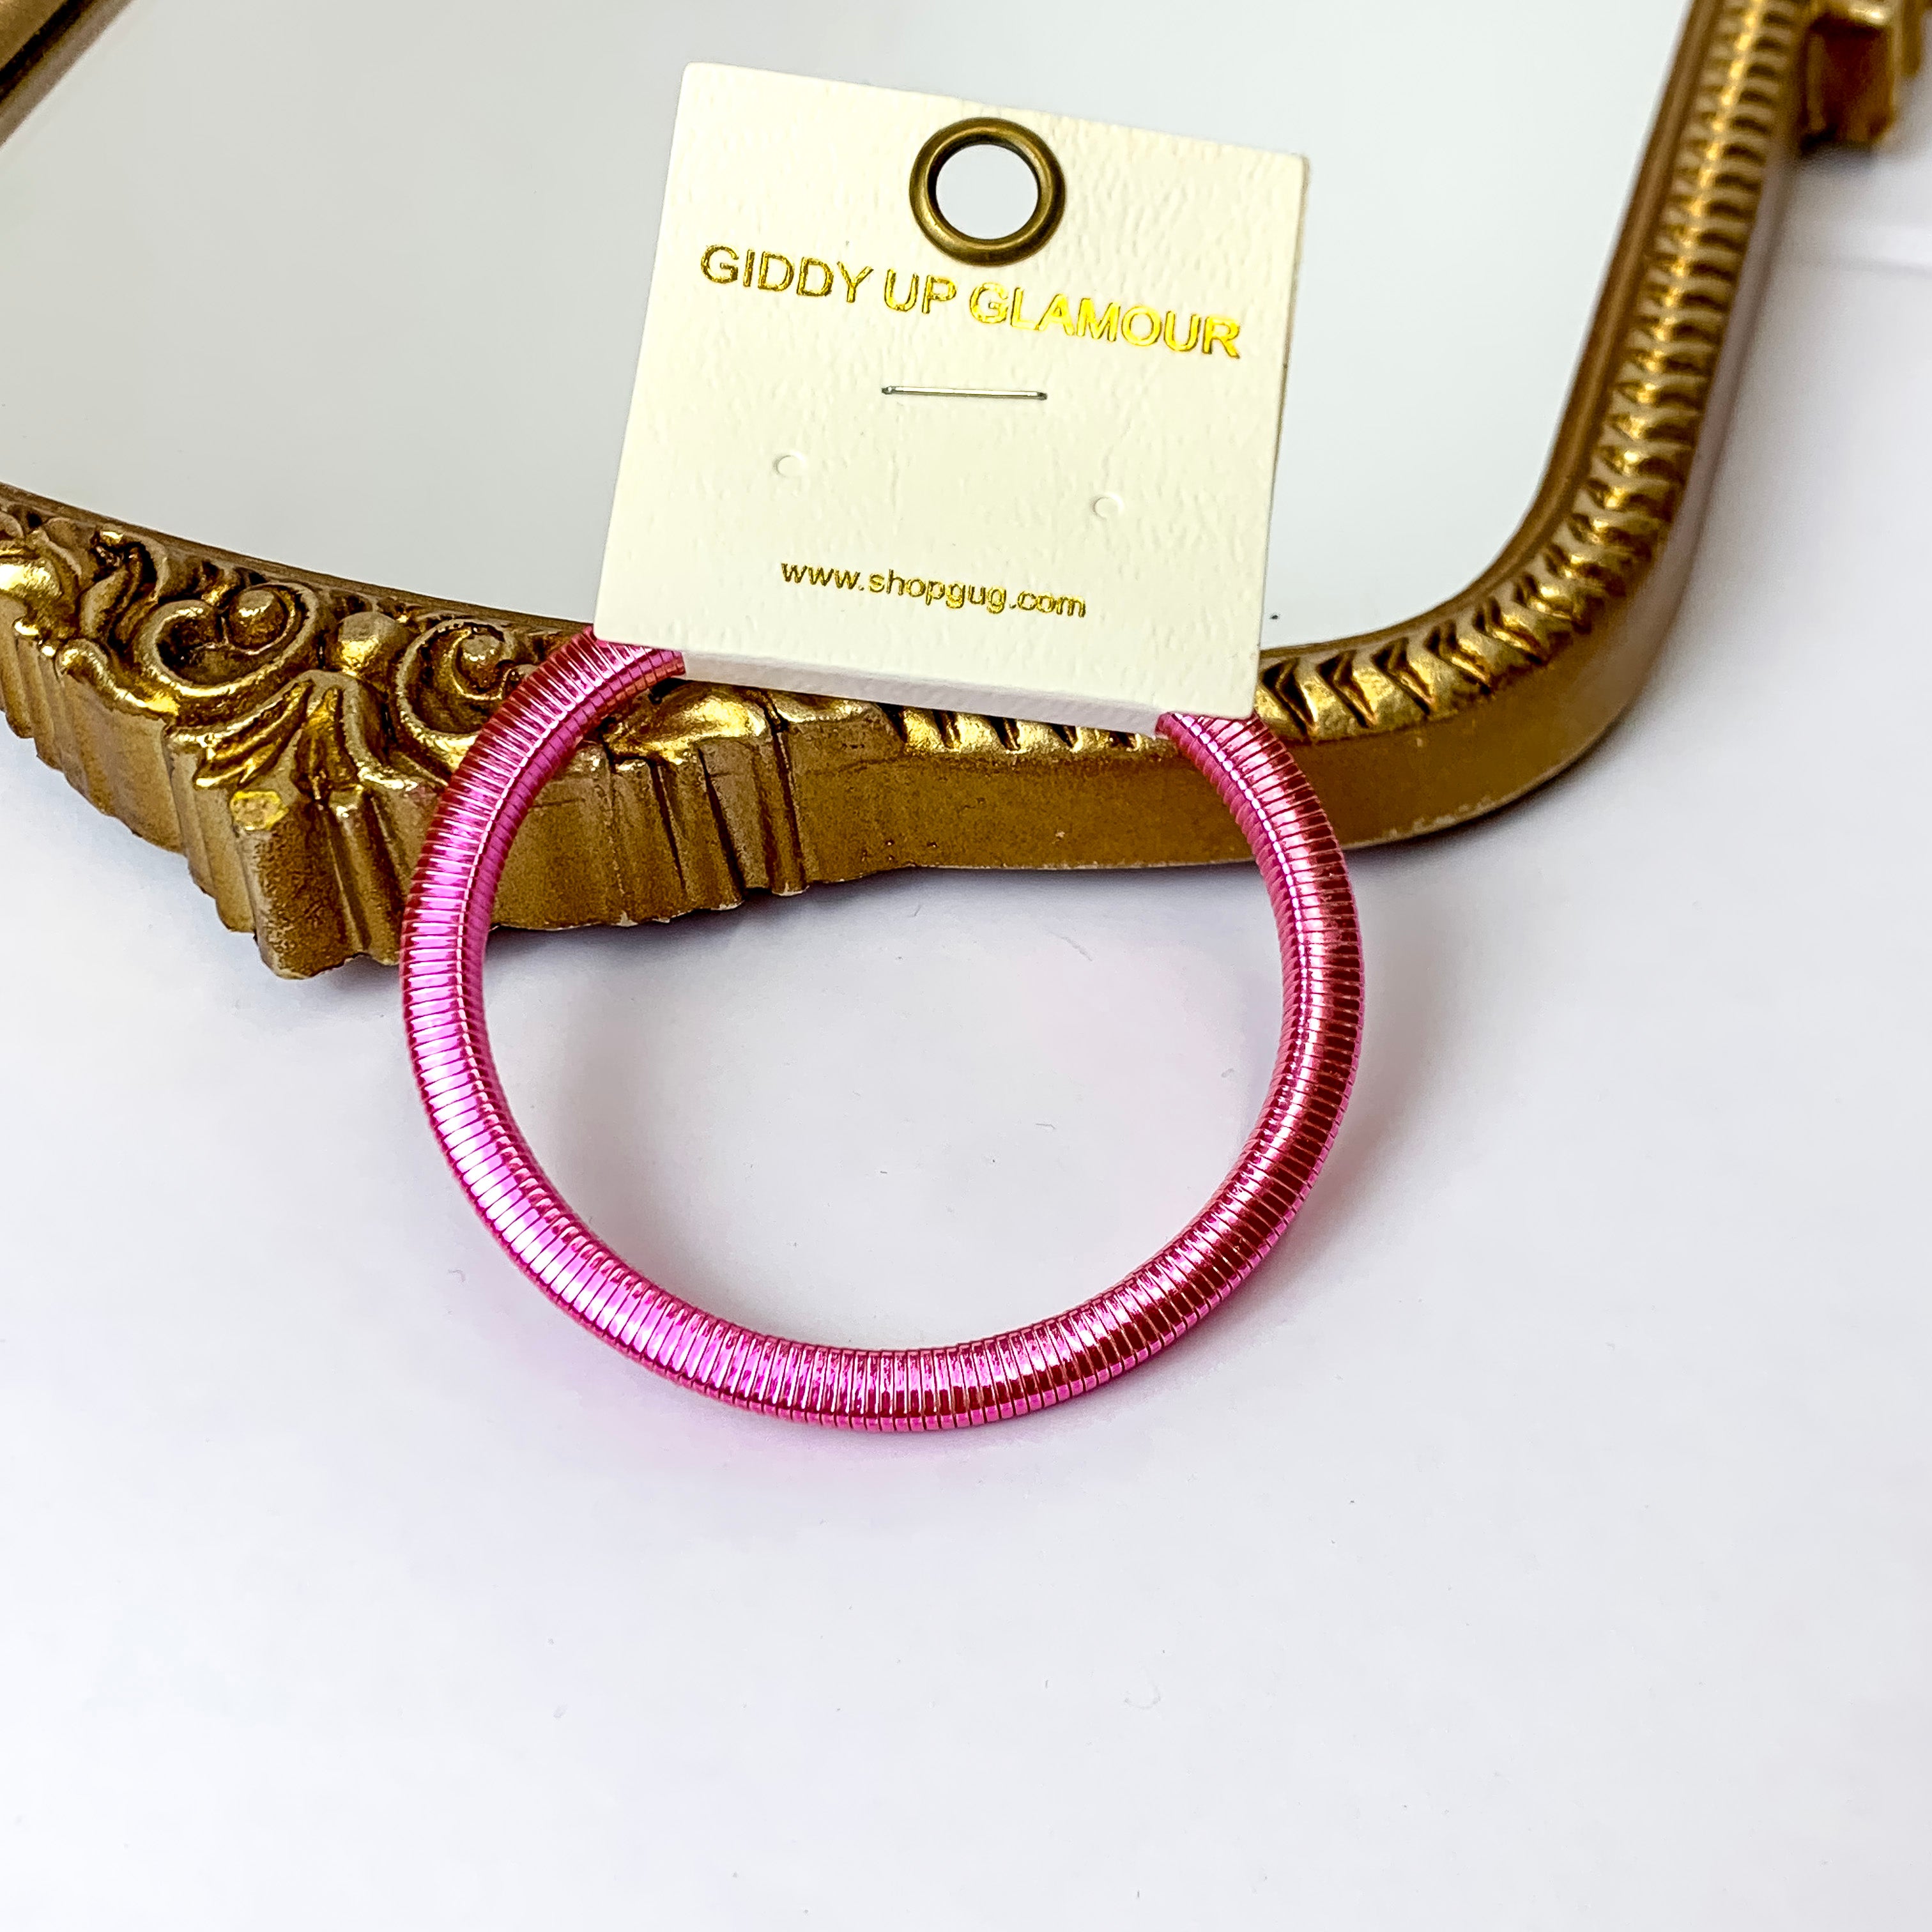 Omega Chain Coil Stretch Bracelet in Pink - Giddy Up Glamour Boutique